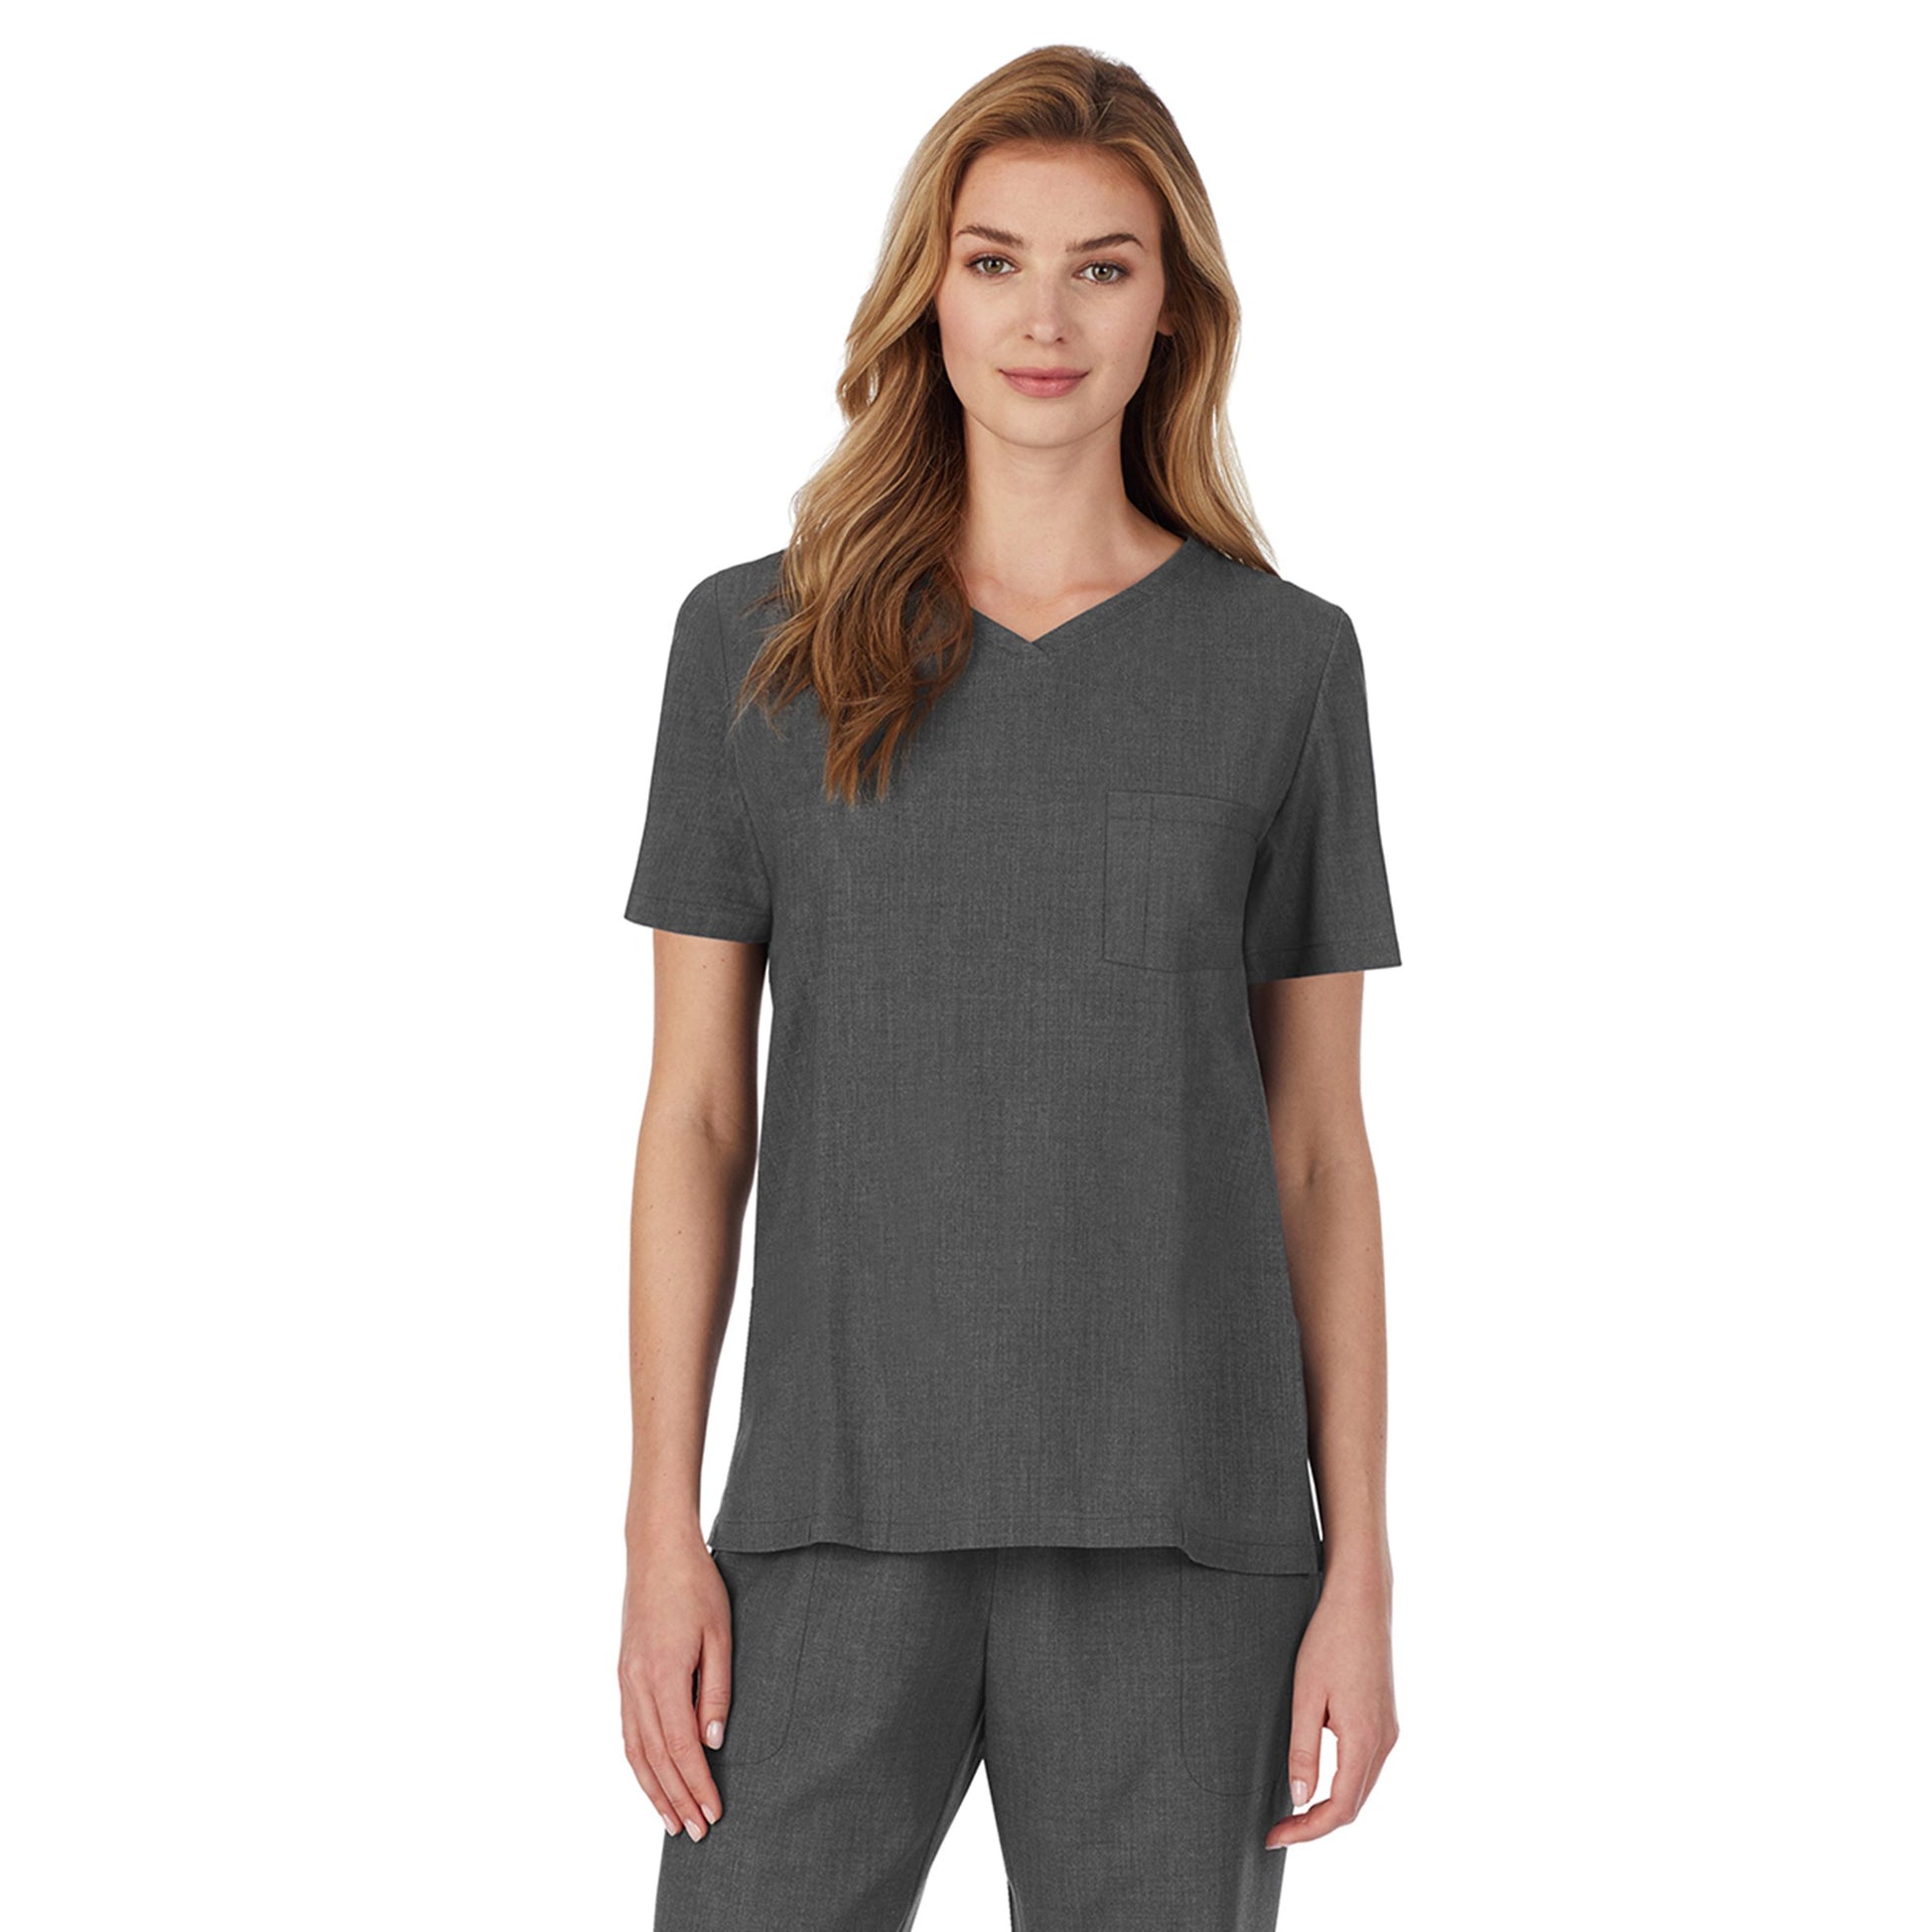 Charcoal Heather;Model is wearing size S. She is 5’9”, Bust 32”, Waist 23", Hips 34.5”.@A lady wearing Charcoal Heather short sleeve scrub v-neck top with chest pocket.